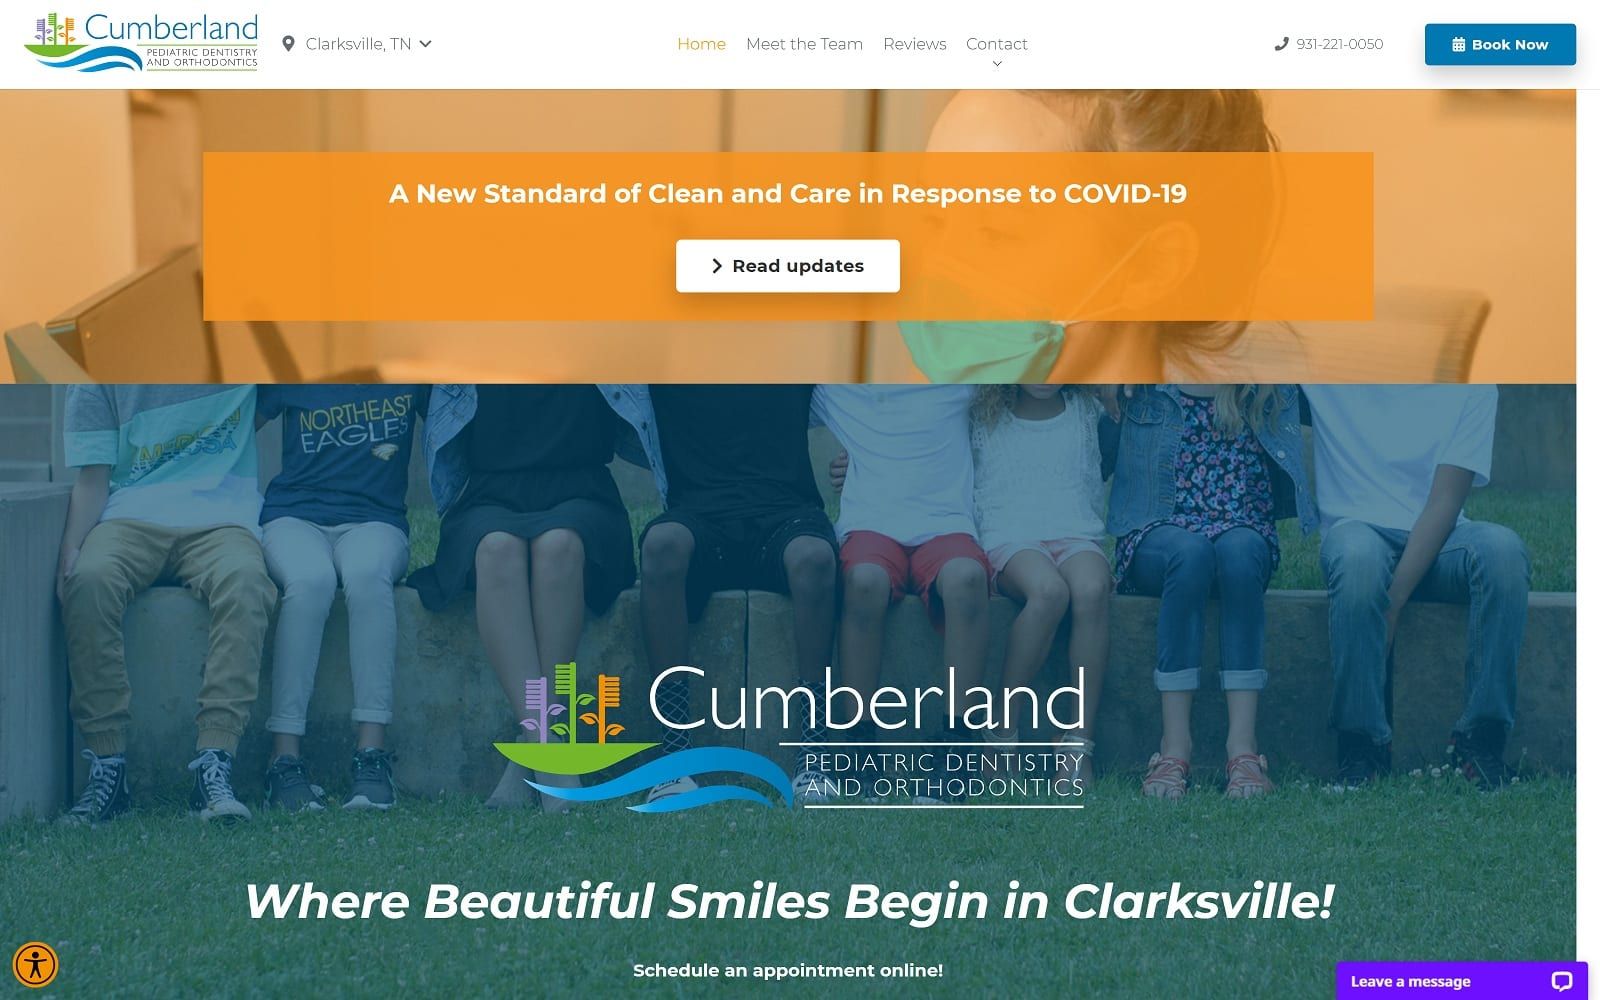 The screenshot of cumberland pediatric dentistry and orthodontics of clarksville cumberlandpediatricdentistry. Com/clarksville website